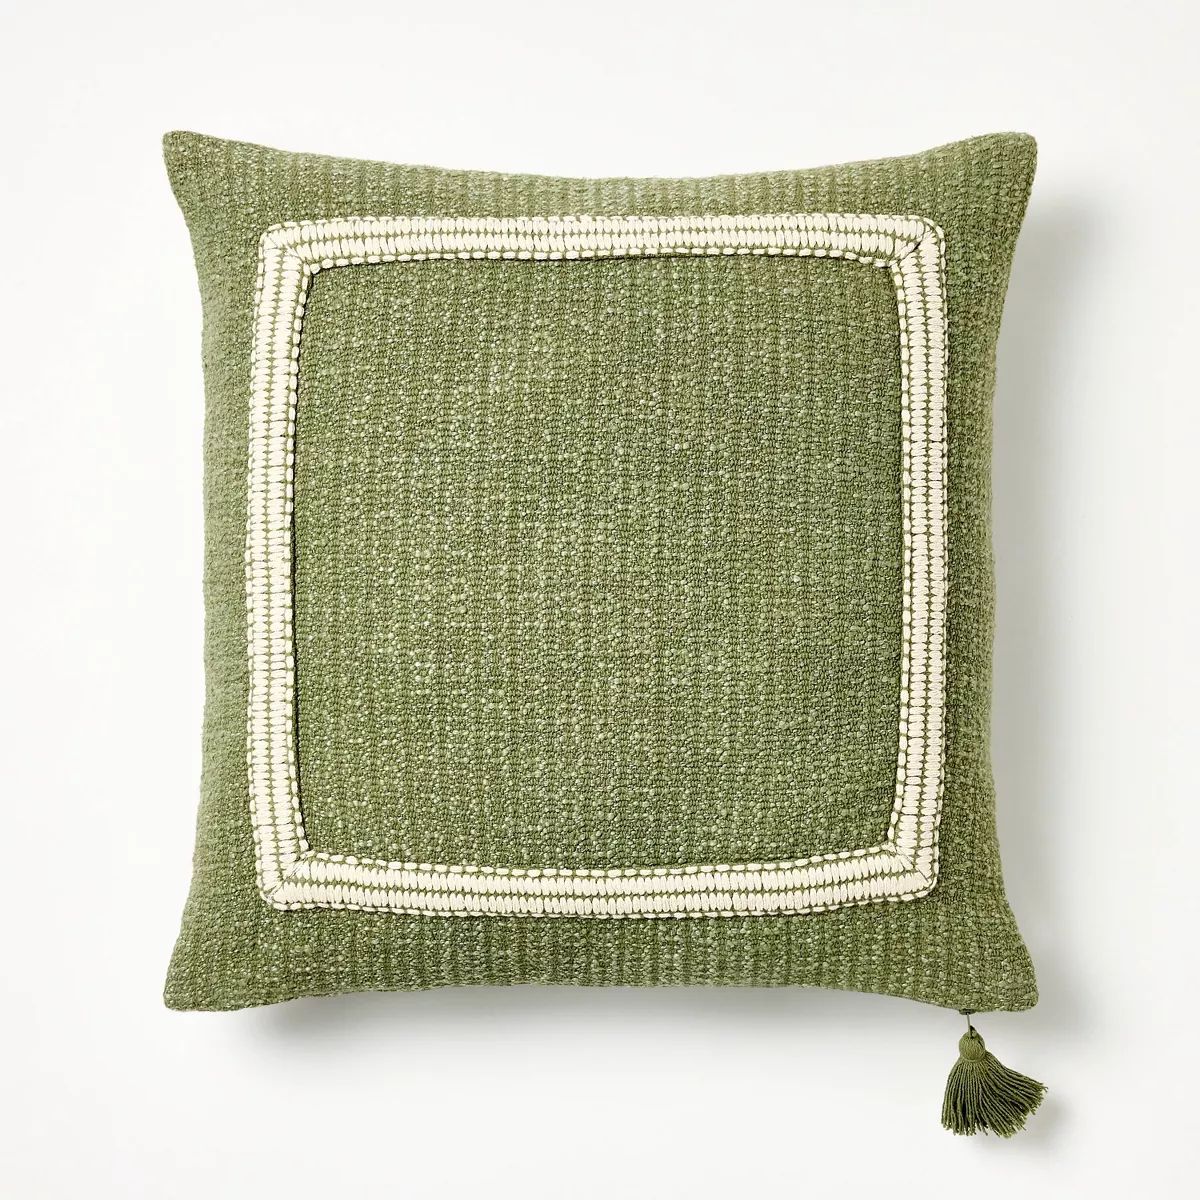 Embroidered Frame Square Throw Pillow - Threshold™ designed with Studio McGee | Target